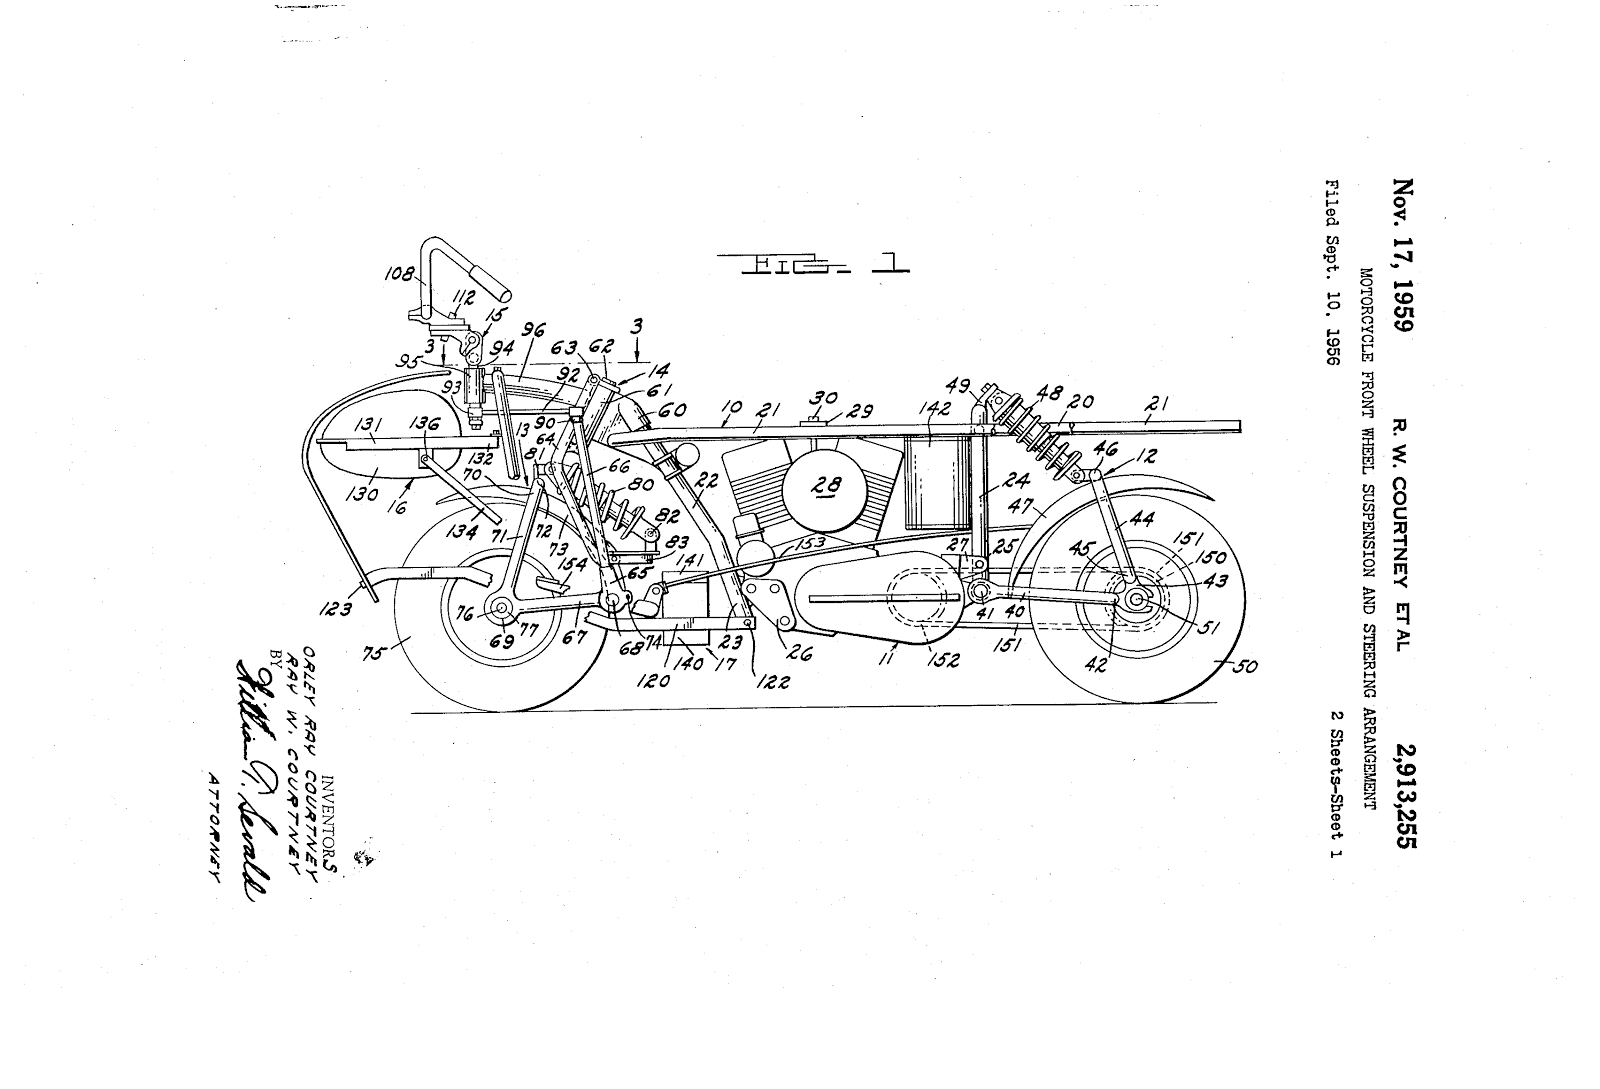 Courtney Enterprise motorcycle chassis patent